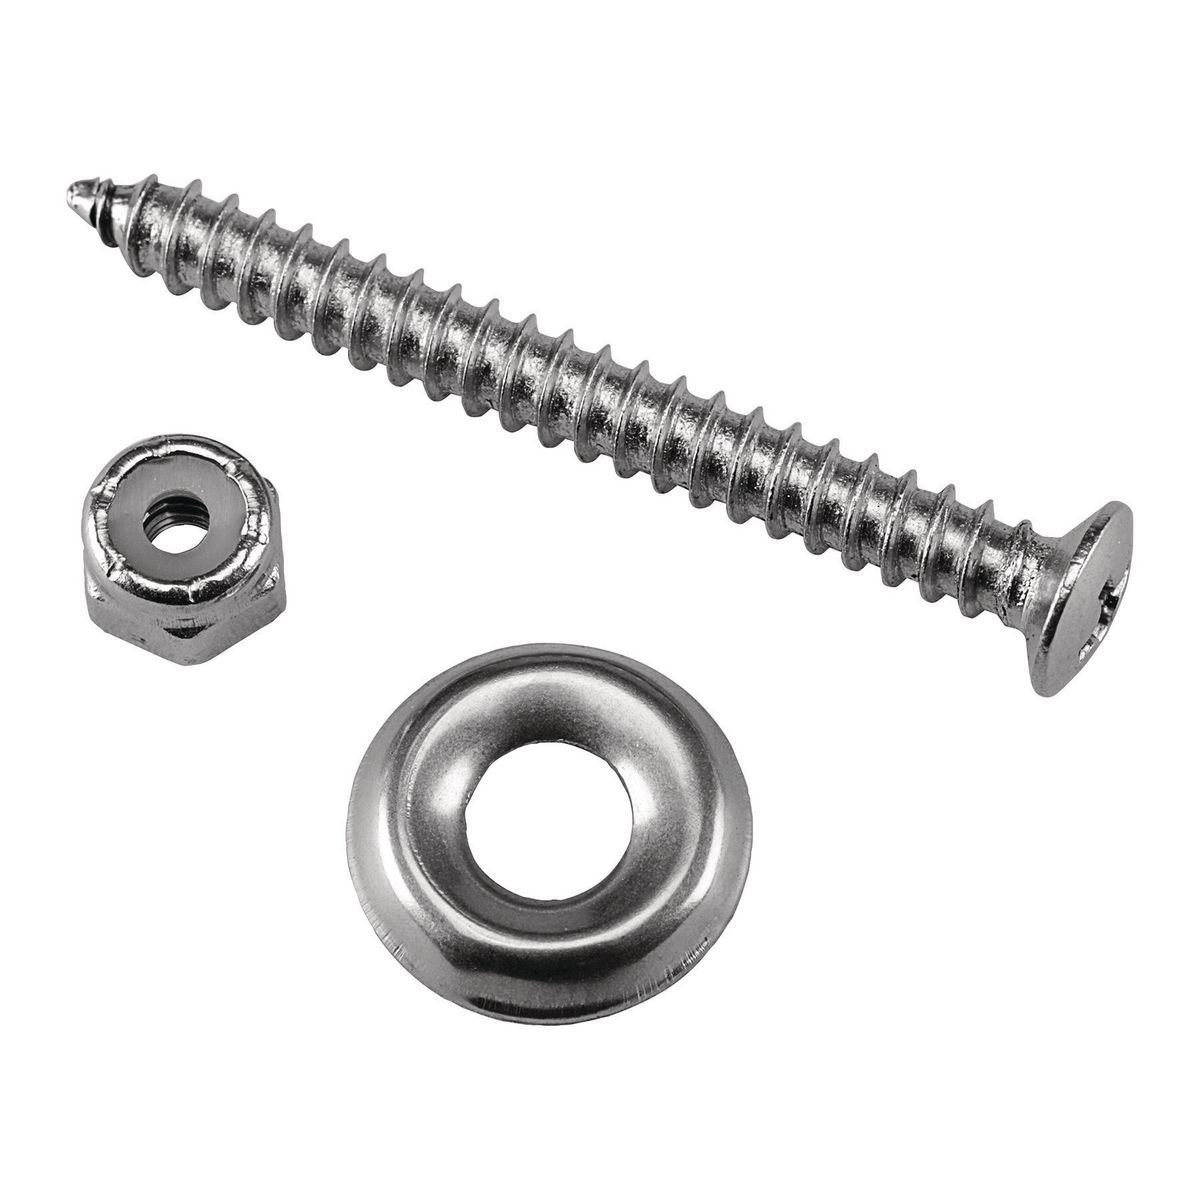 STOREHOUSE 96 Piece Stainless Steel Screw and Nut Set